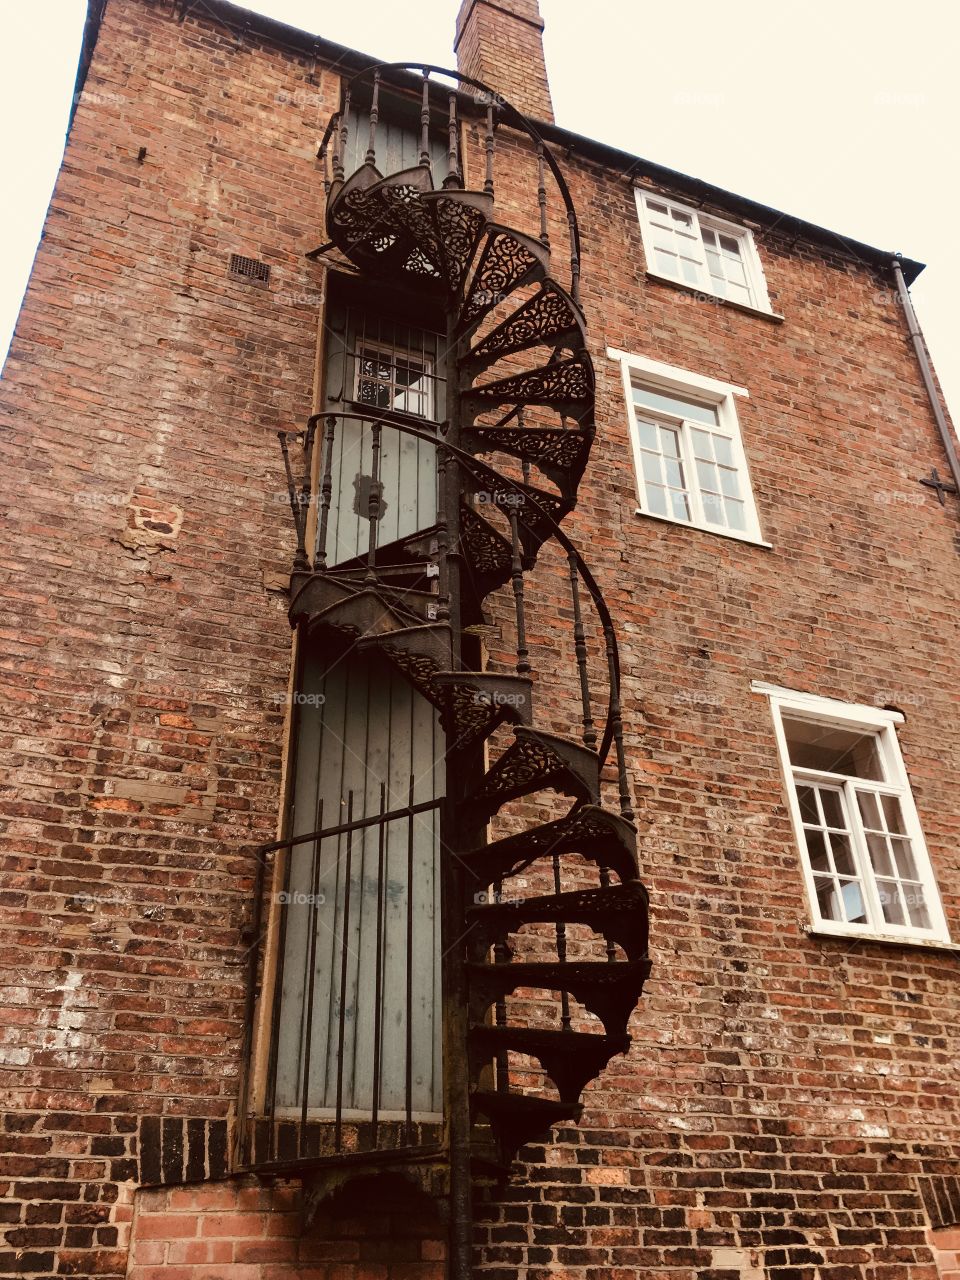 Interesting old riverside brick building with external spiral staircases between floors